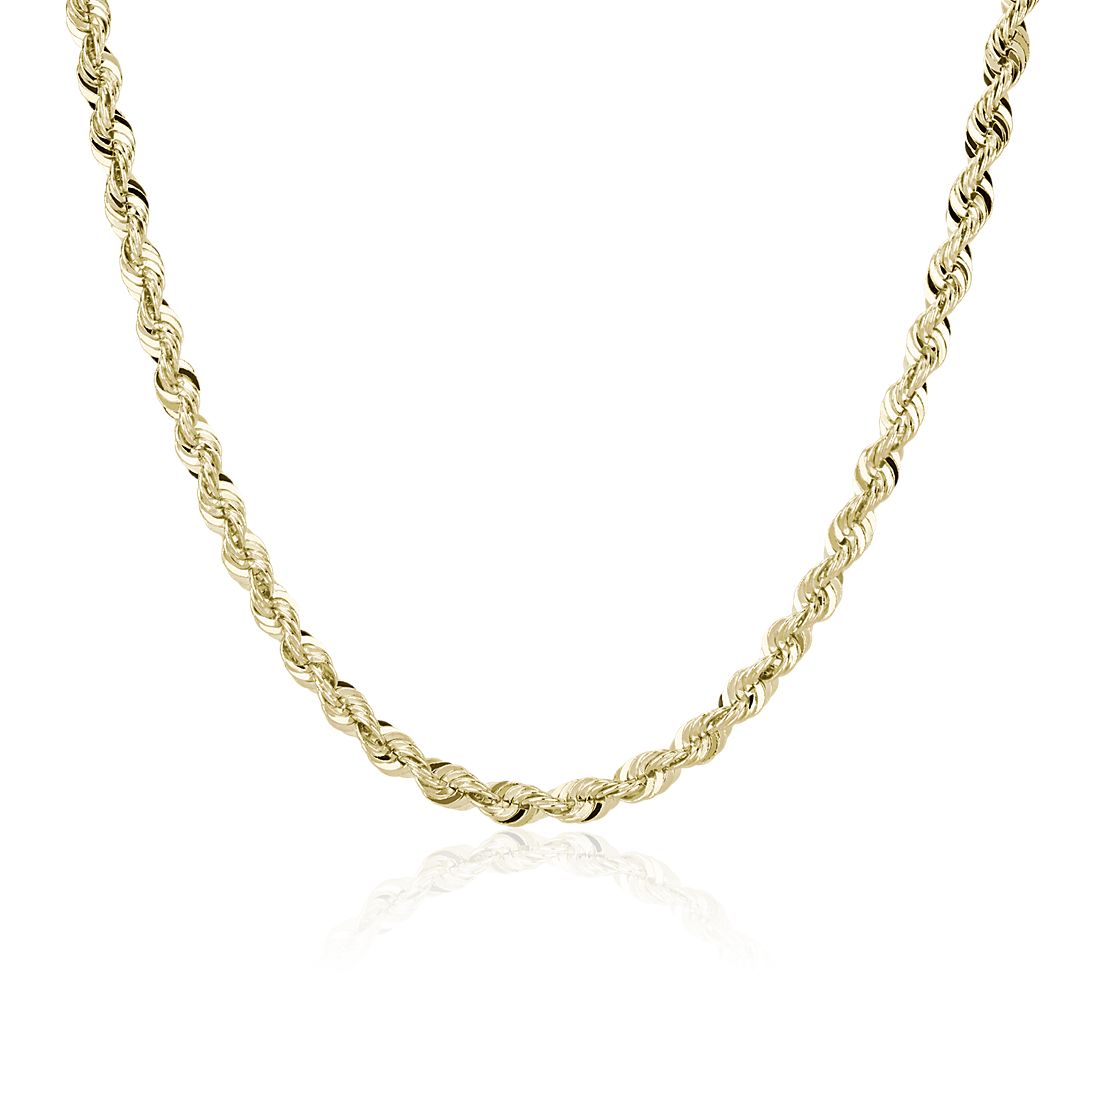 24" Men's Solid Diamond Cut Rope Necklace in 14k Yellow Gold (6 mm)